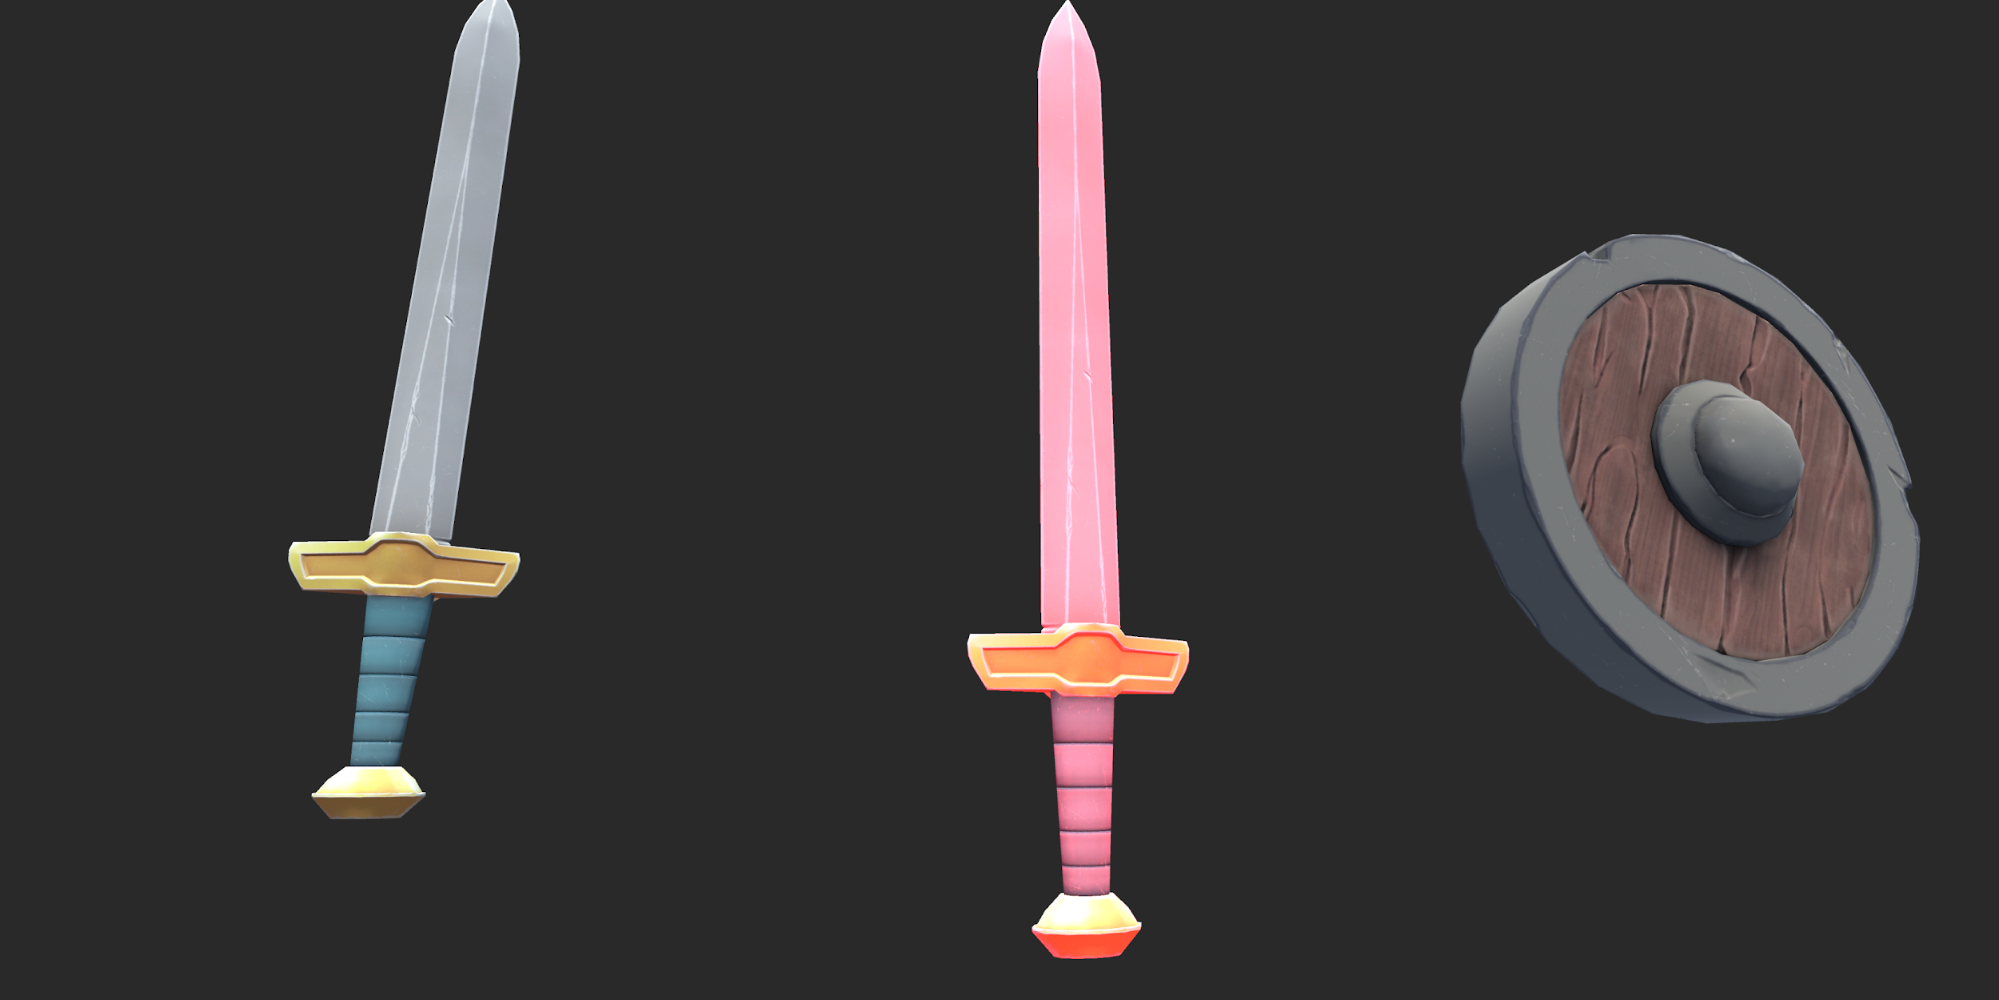 A silver/grey sword is on the left, a pink sword is in the middle and a wooden/brown and silver/grey circular shield is on the right. The background is black. 